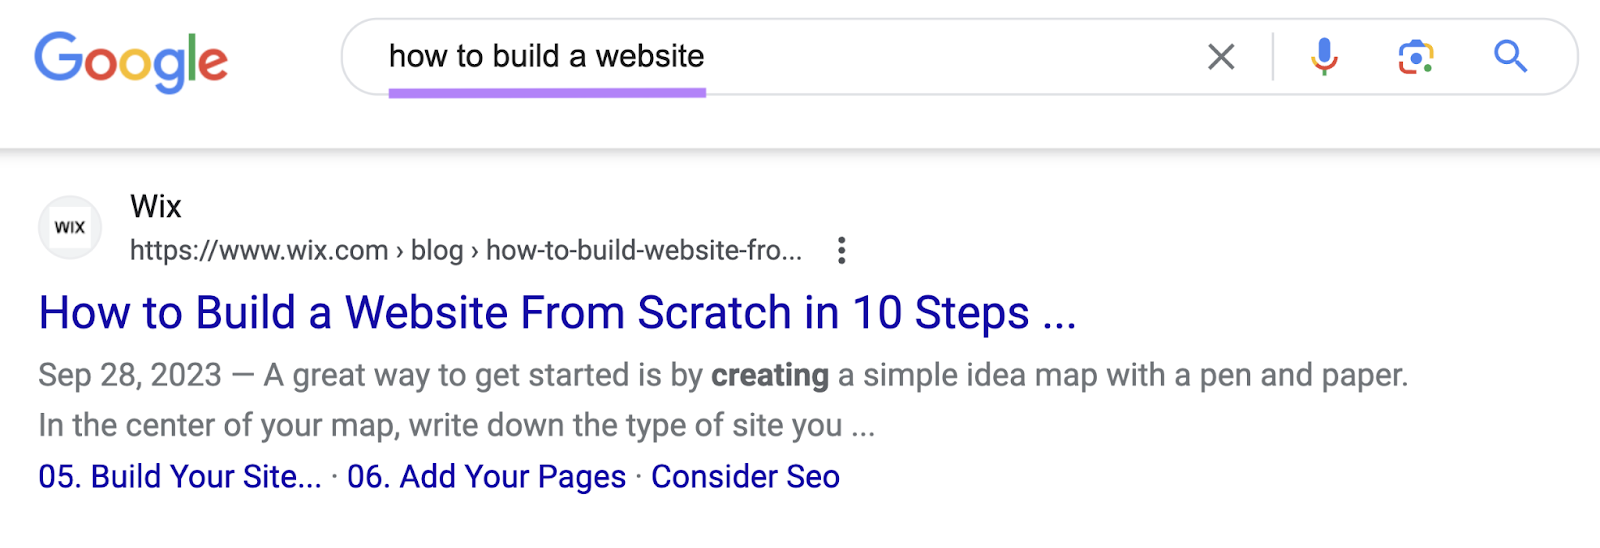 Wix' result on Google SERP for "how to build a website” query